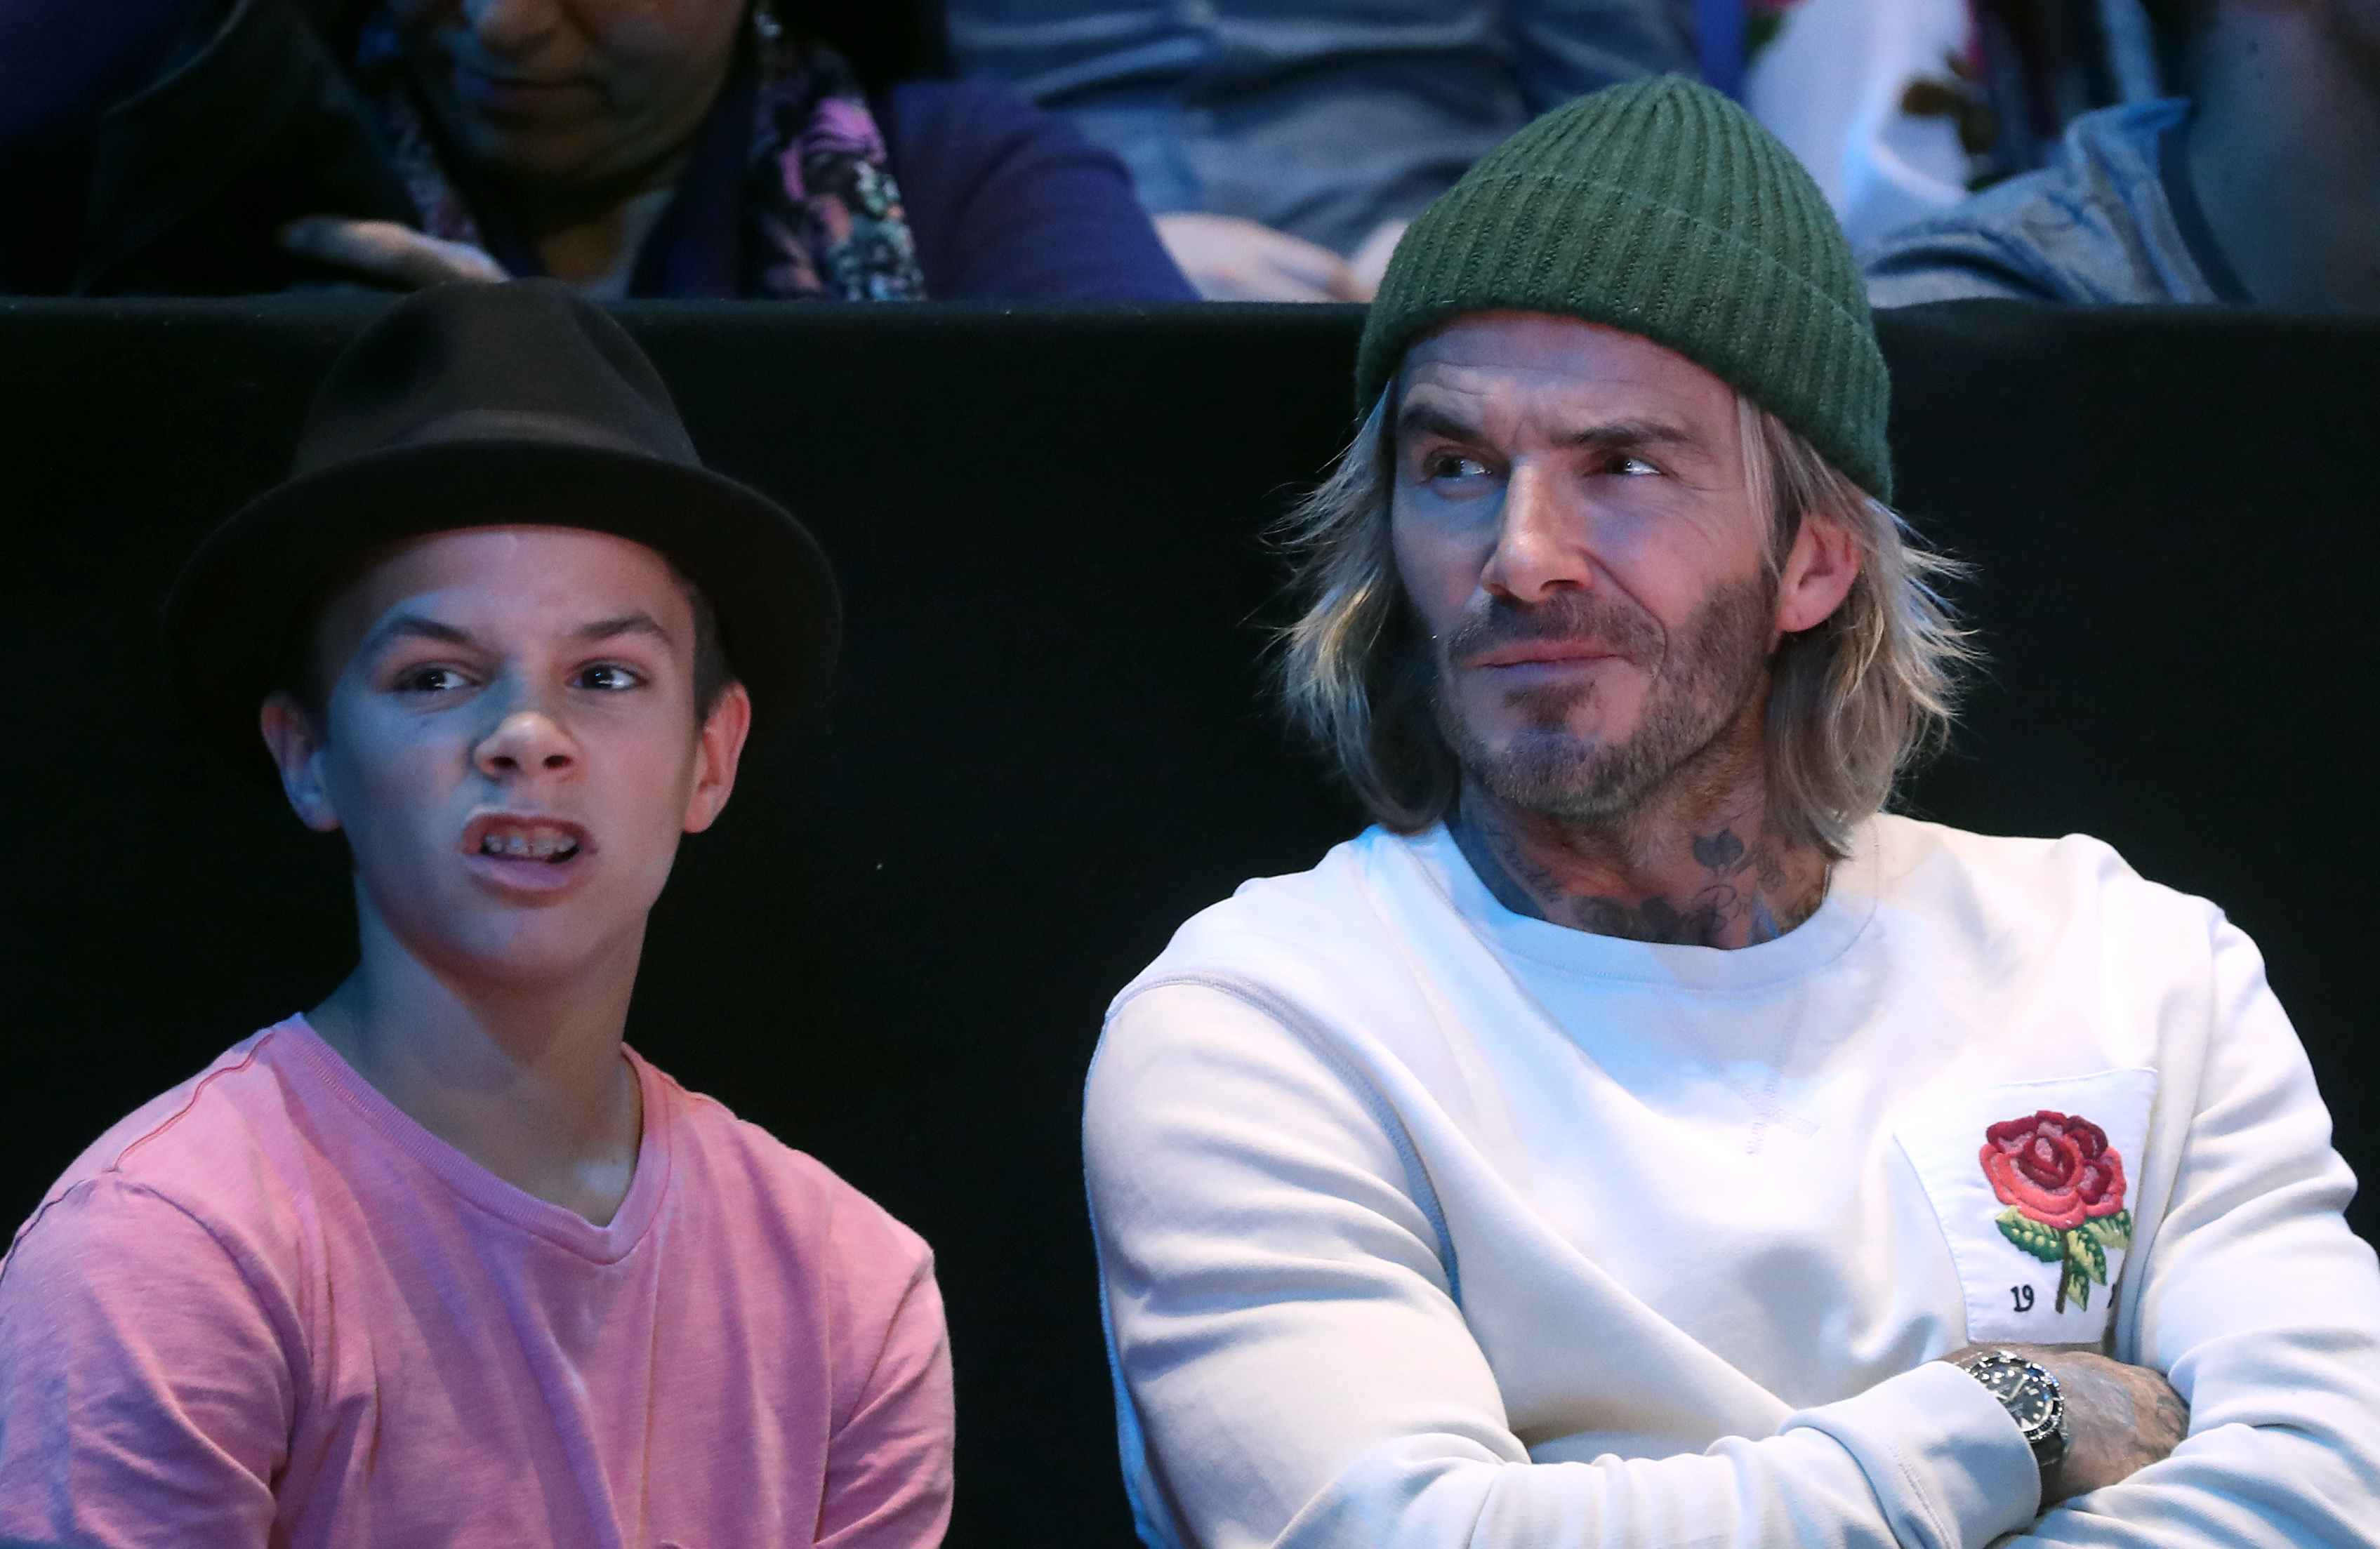 (Adam Davy/PA) Romeo Beckham and David Beckham in the crowd during the Men's Single Final during day eight of the NITTO ATP World Tour Finals at the O2 Arena, London